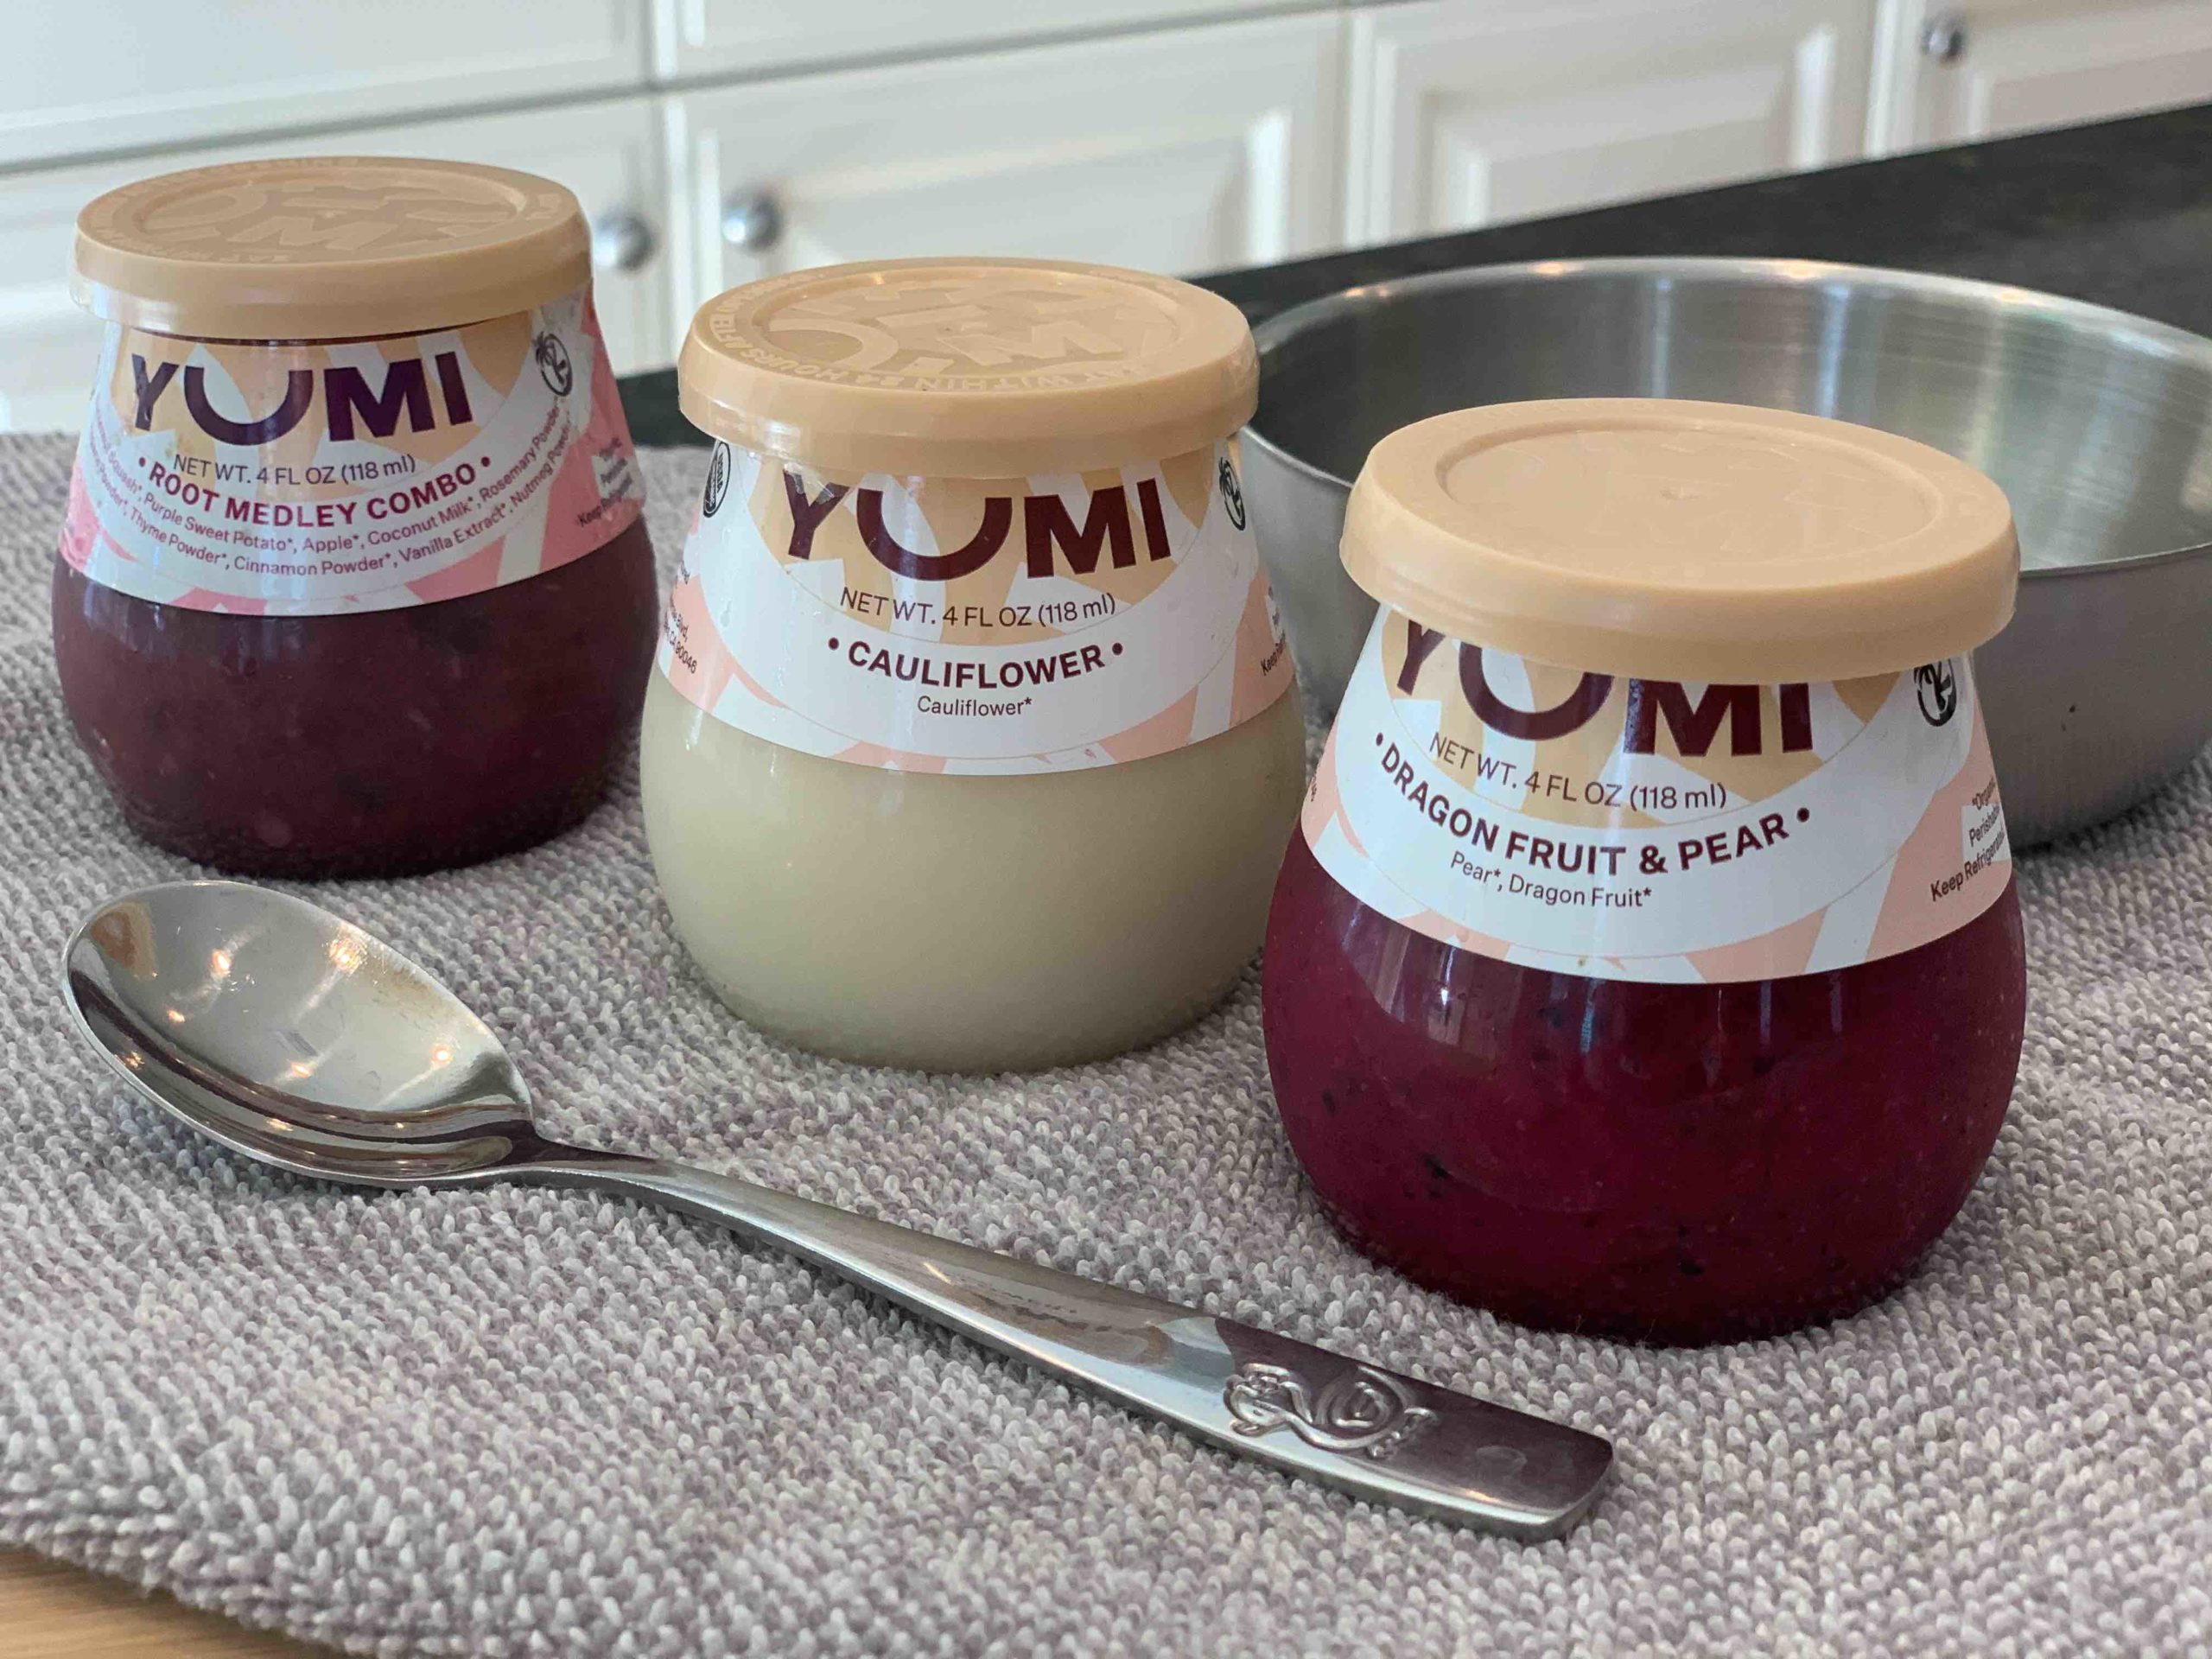 yumi brand organic baby food from organic meal subscription service for babies